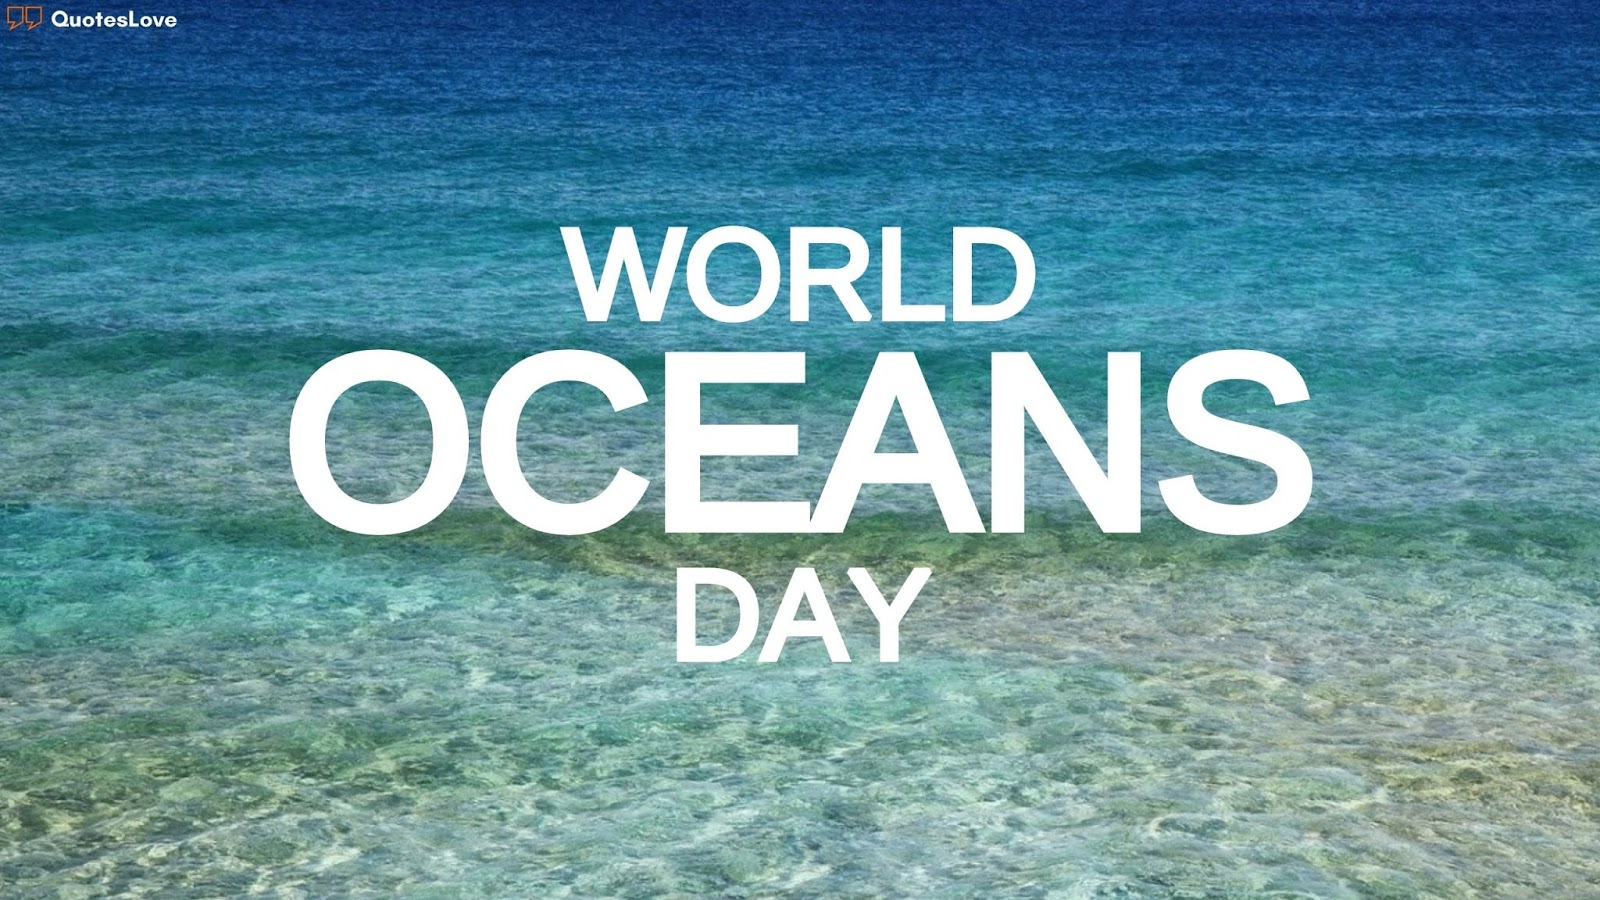 World Oceans Day Quotes, Wishes, Messages, Greetings, Images, Photo, Pictures, Poster, Wallpaper